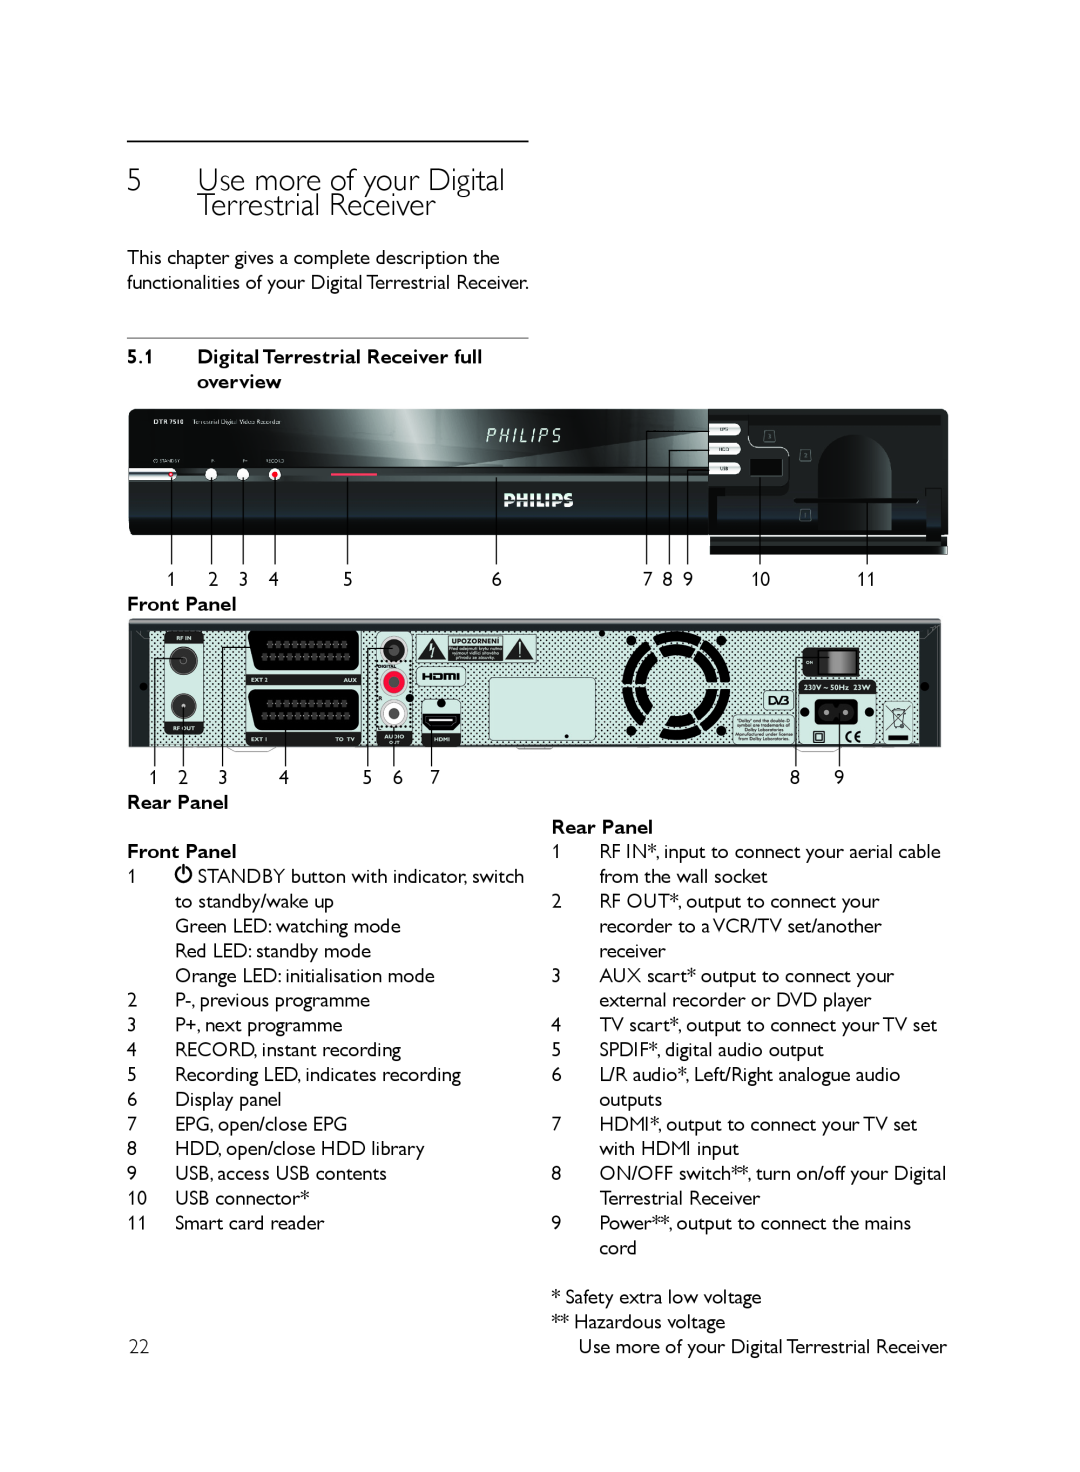 Philips DTR7510/05, DTR 7510 5Use more of your Digital Terrestrial Receiver, 5.1Digital Terrestrial Receiver full overview 